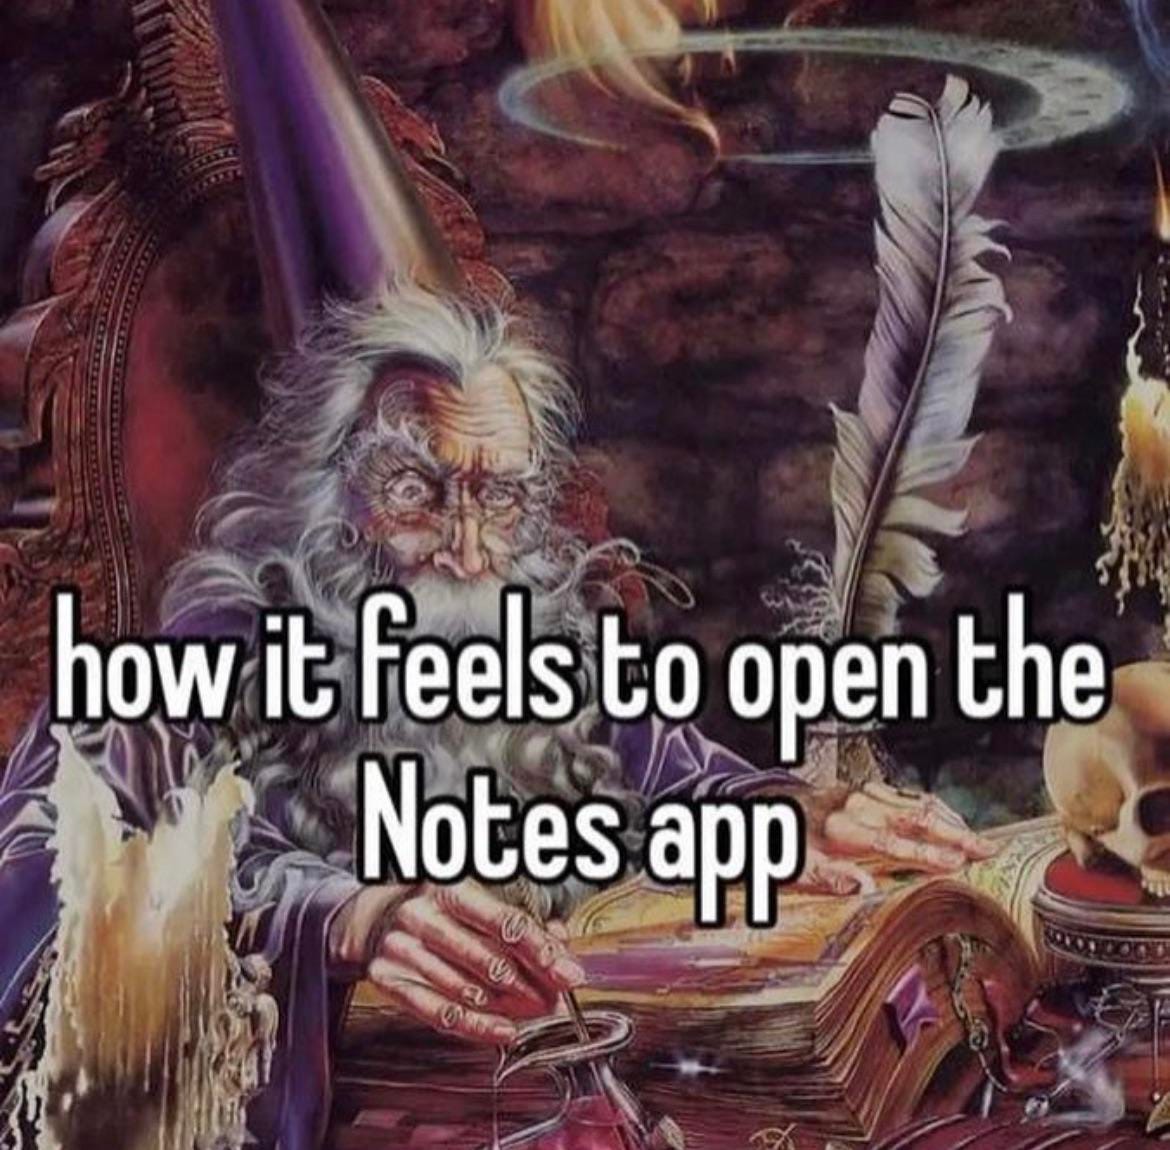 Wizard writing with quill : r/MemeTemplatesOfficial